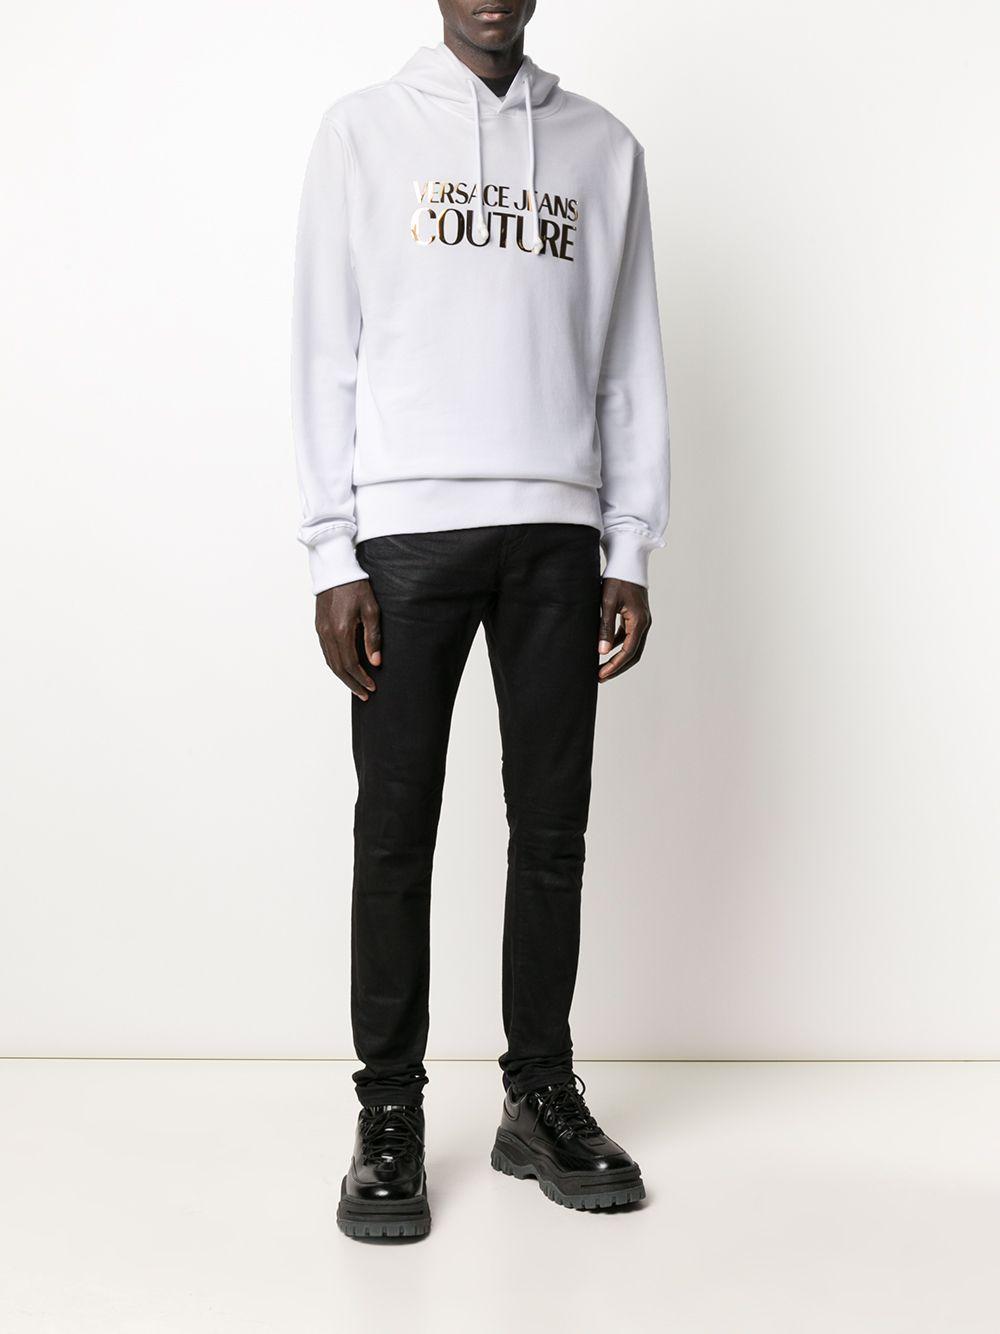 Versace Jeans Couture Metallic-logo Cotton Hoodie in White for Men - Lyst